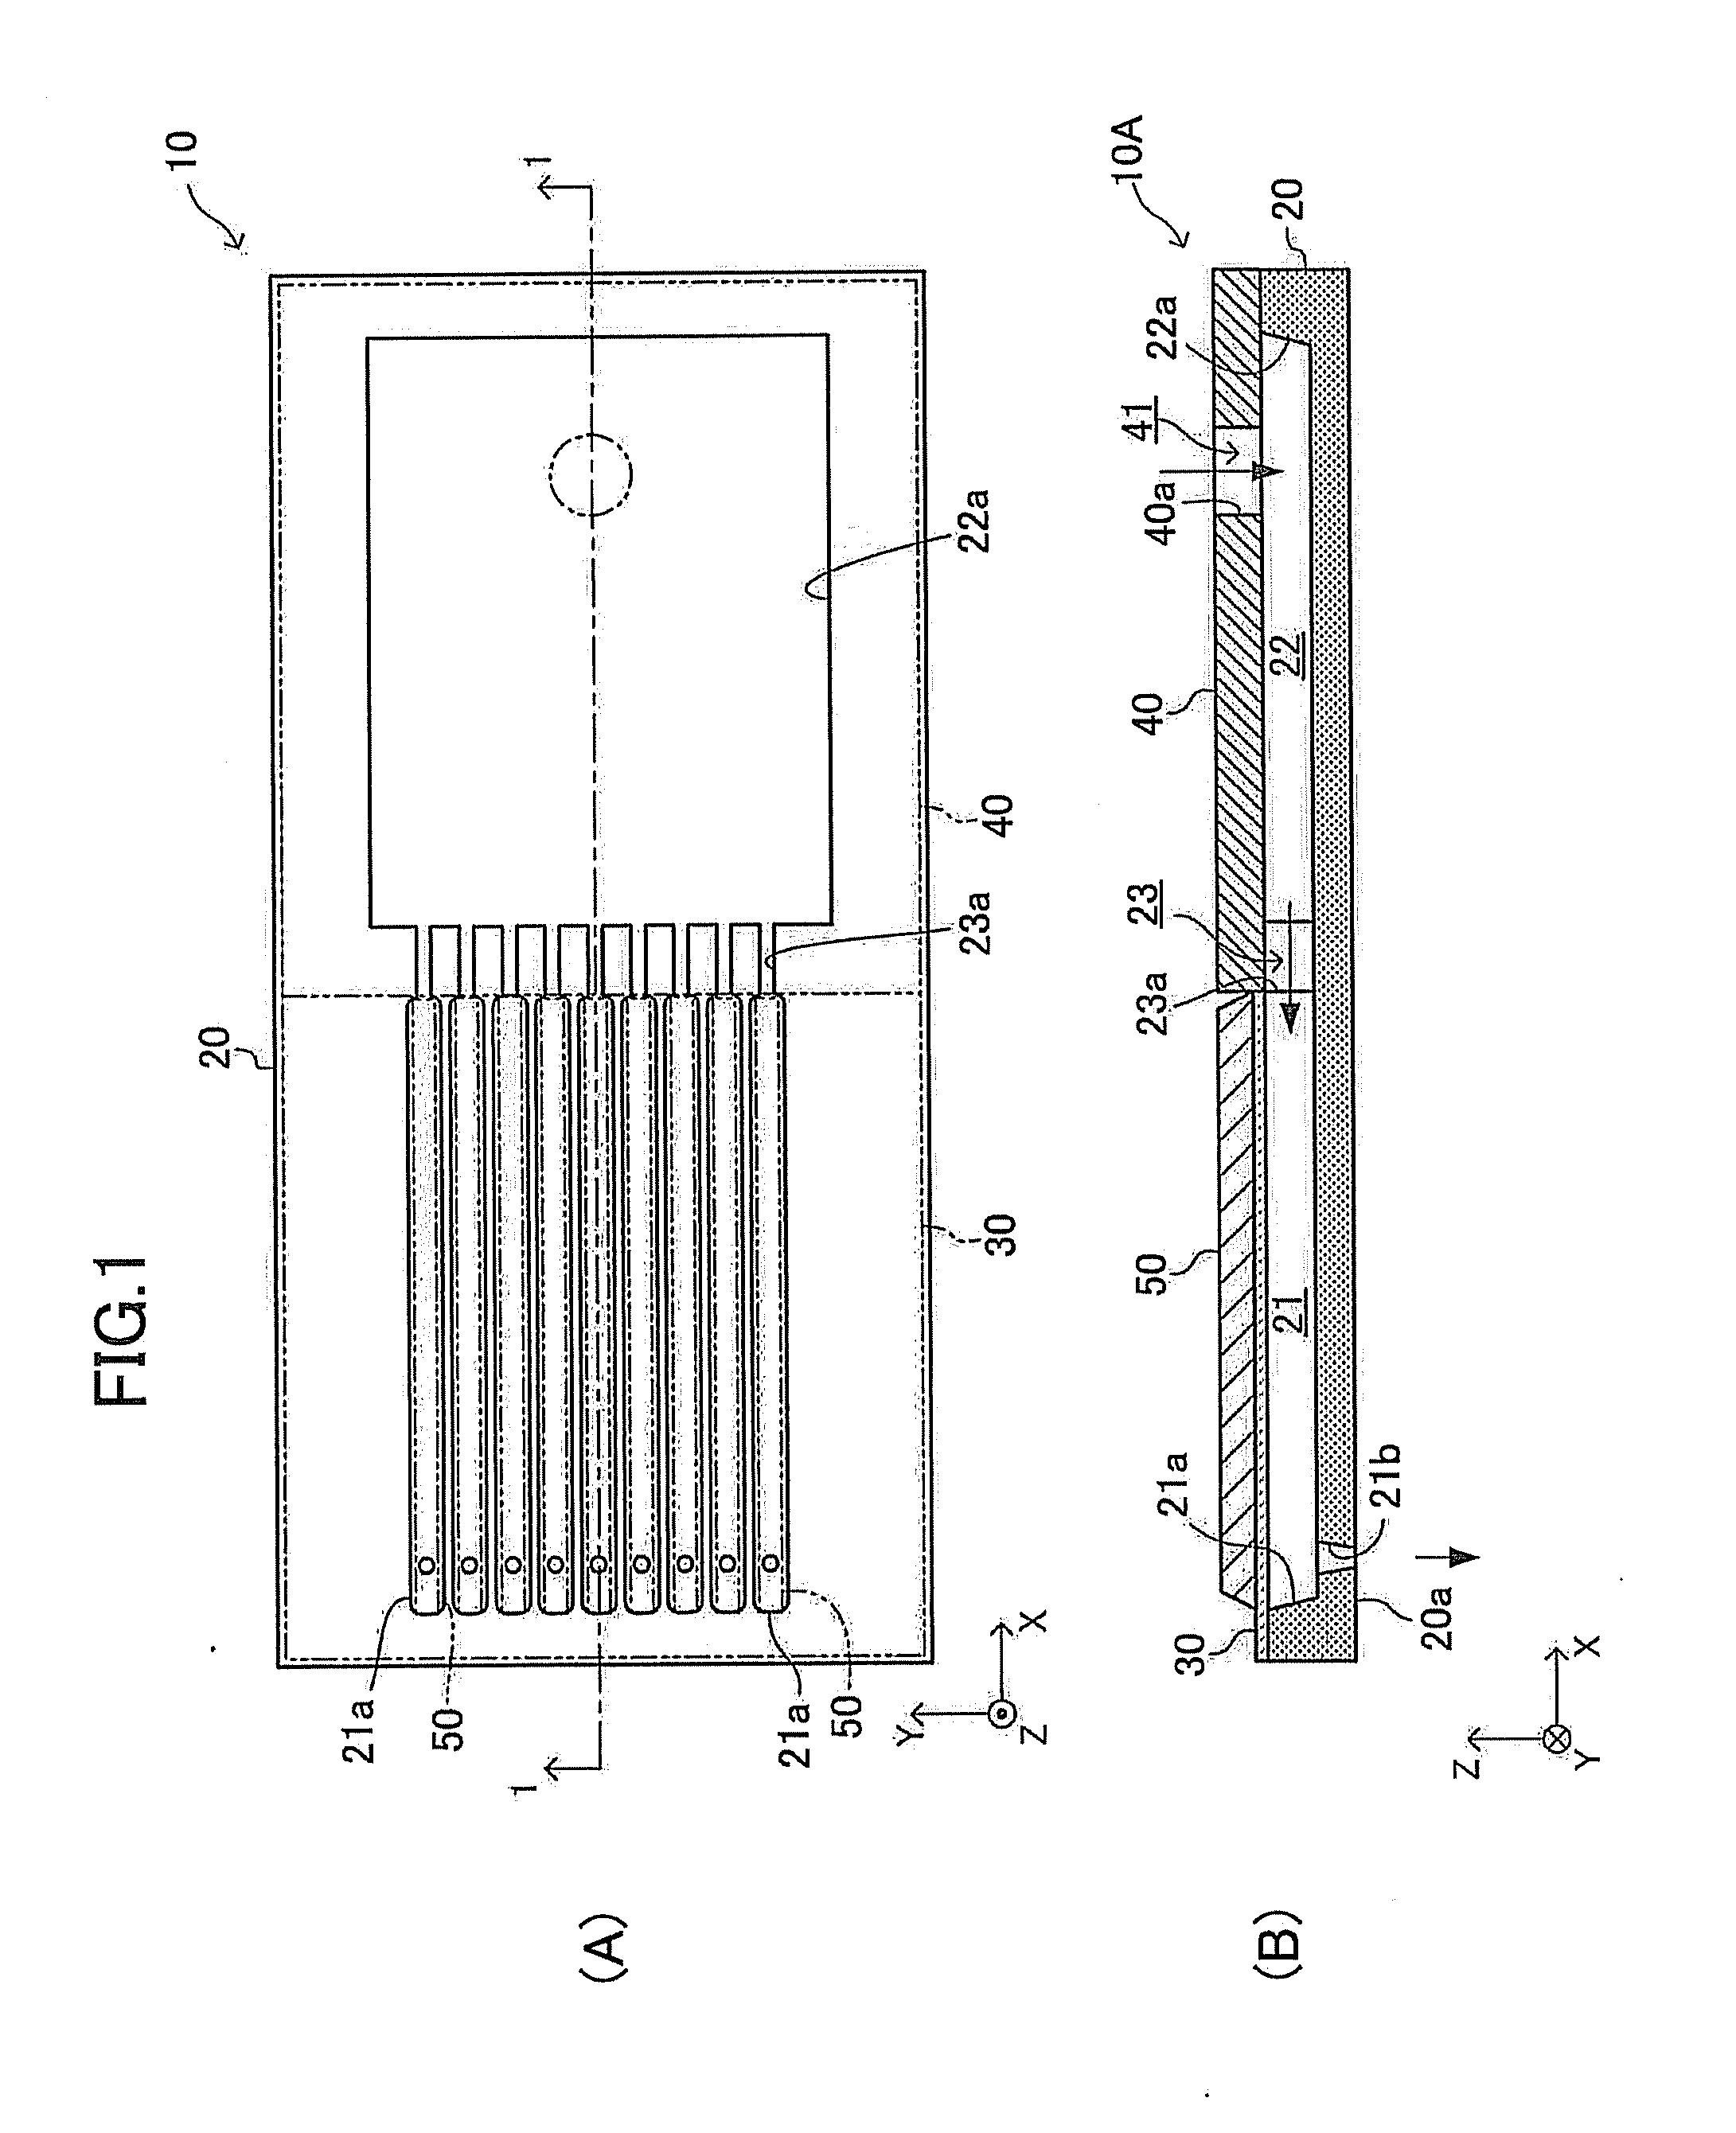 Method for manufacturing a droplet discharge head